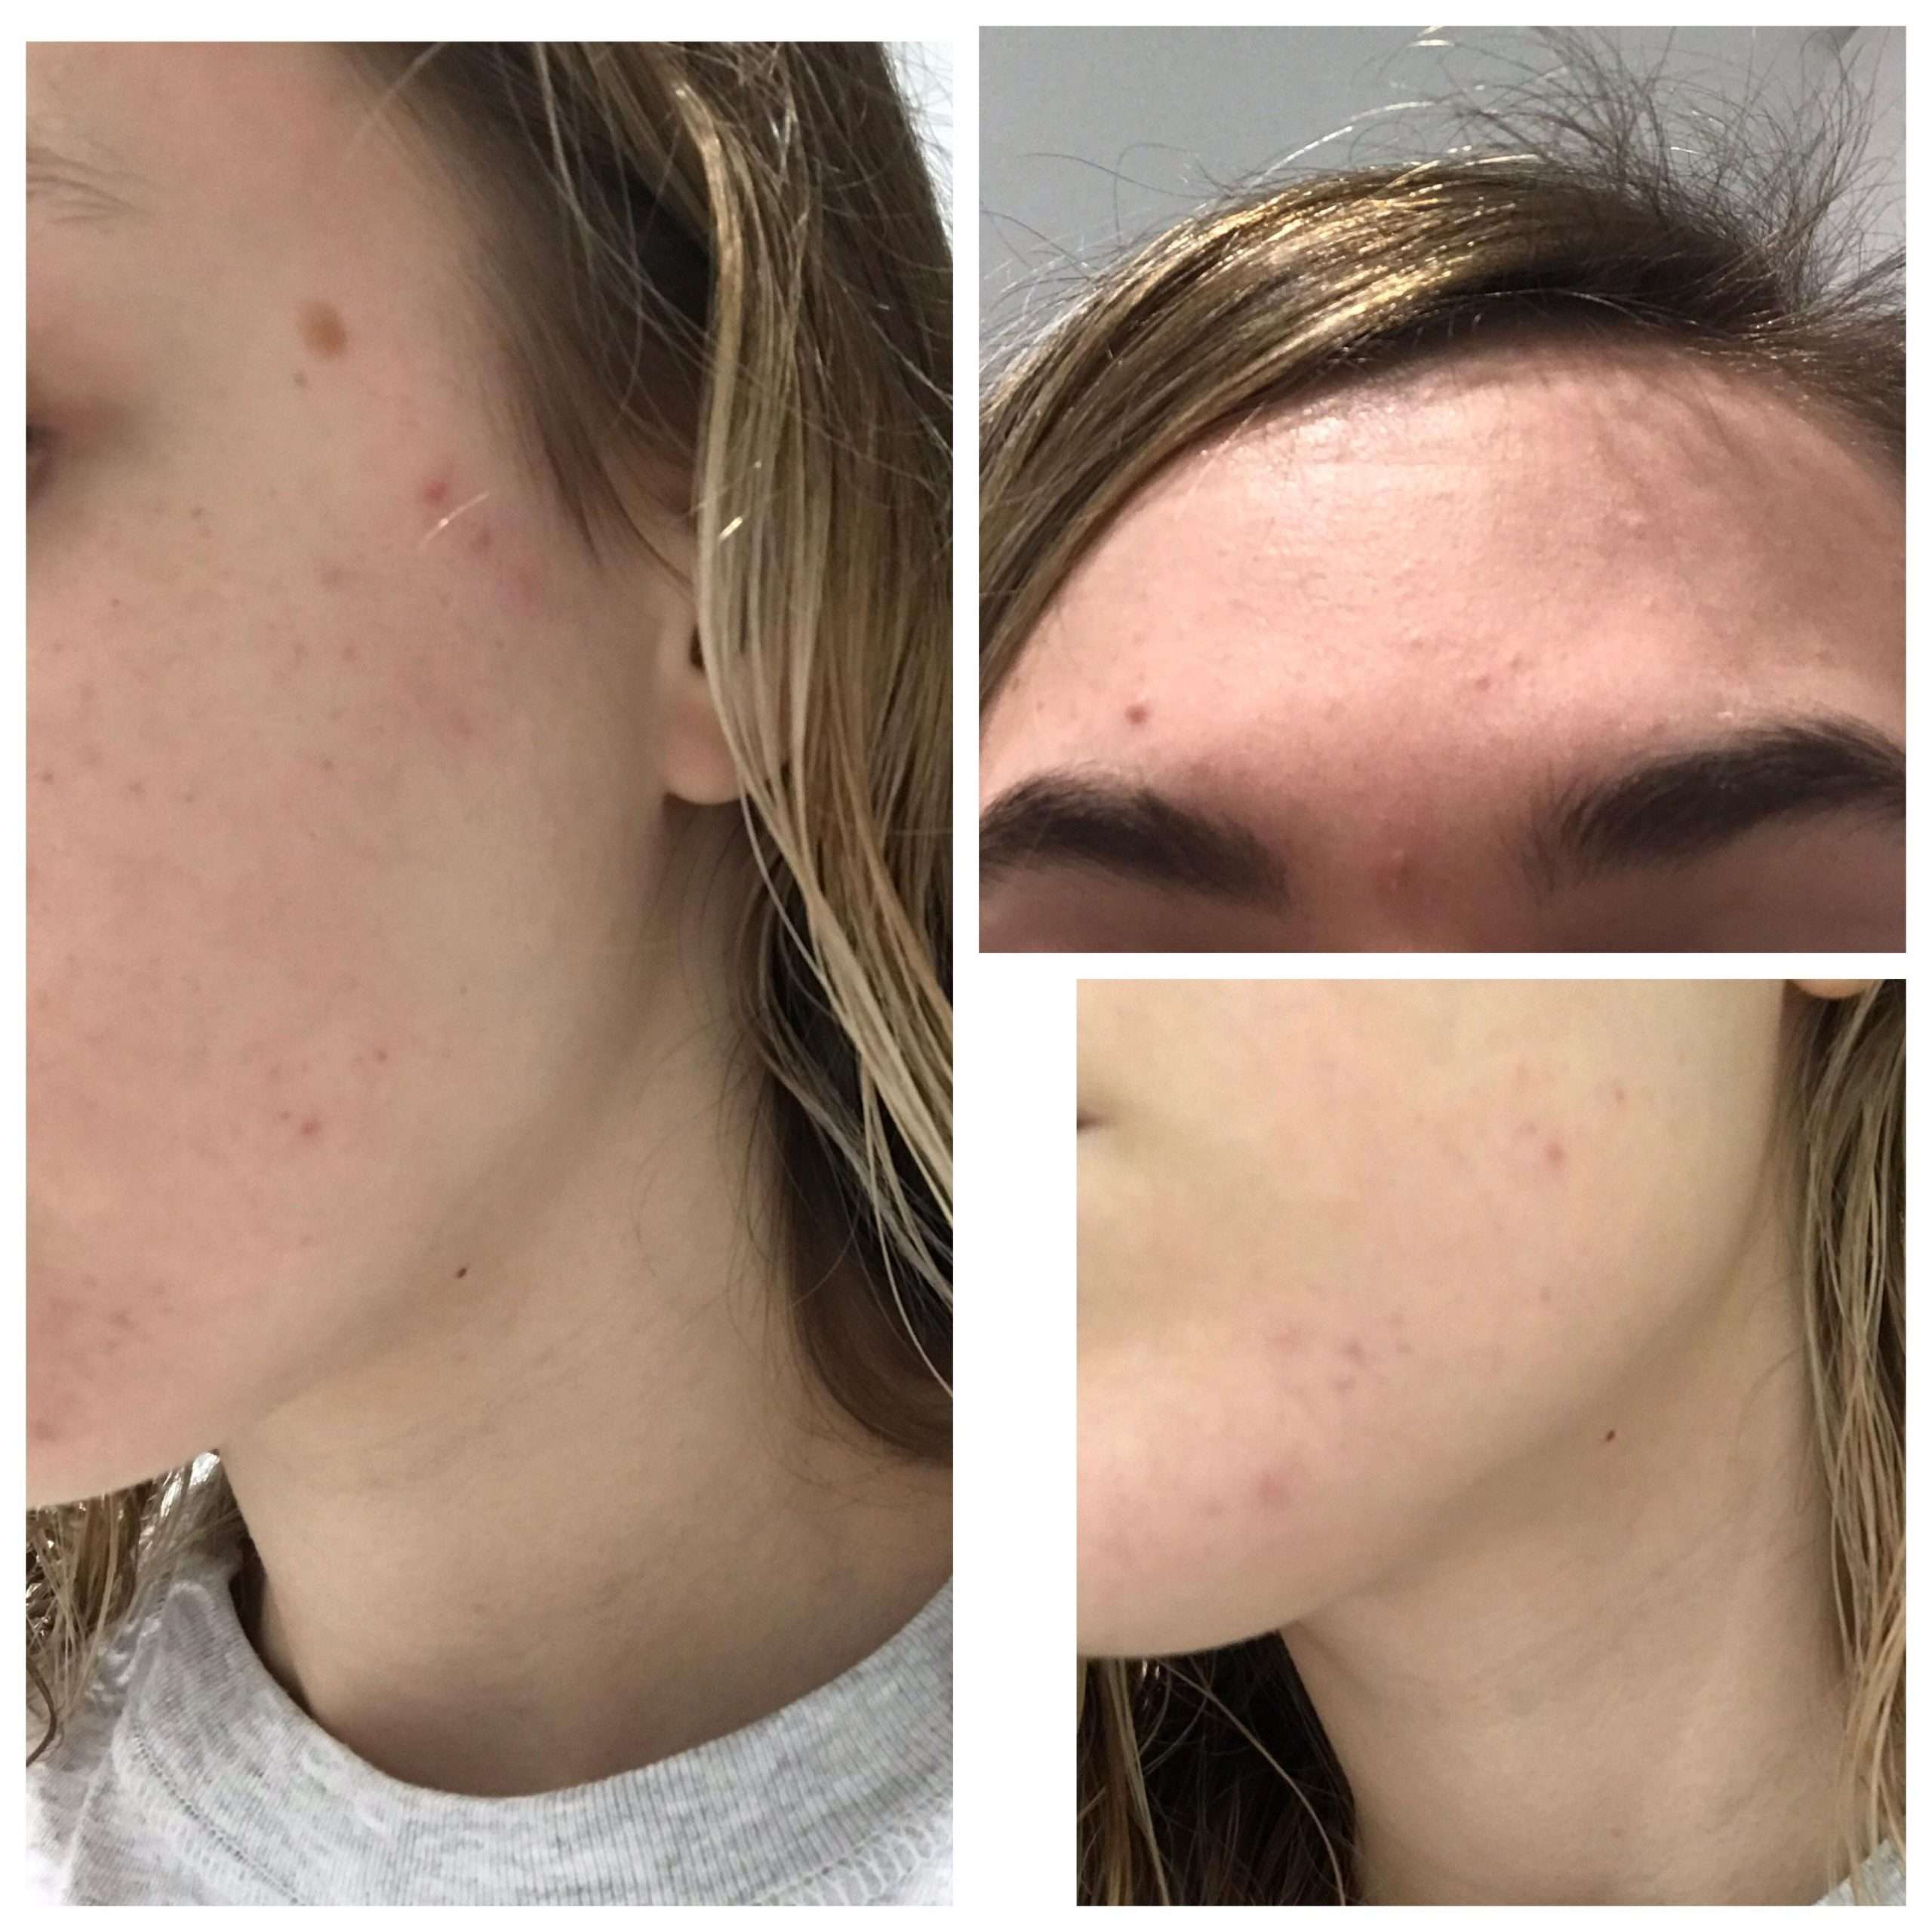 How to help hormonal acne/whatever this is? : acne